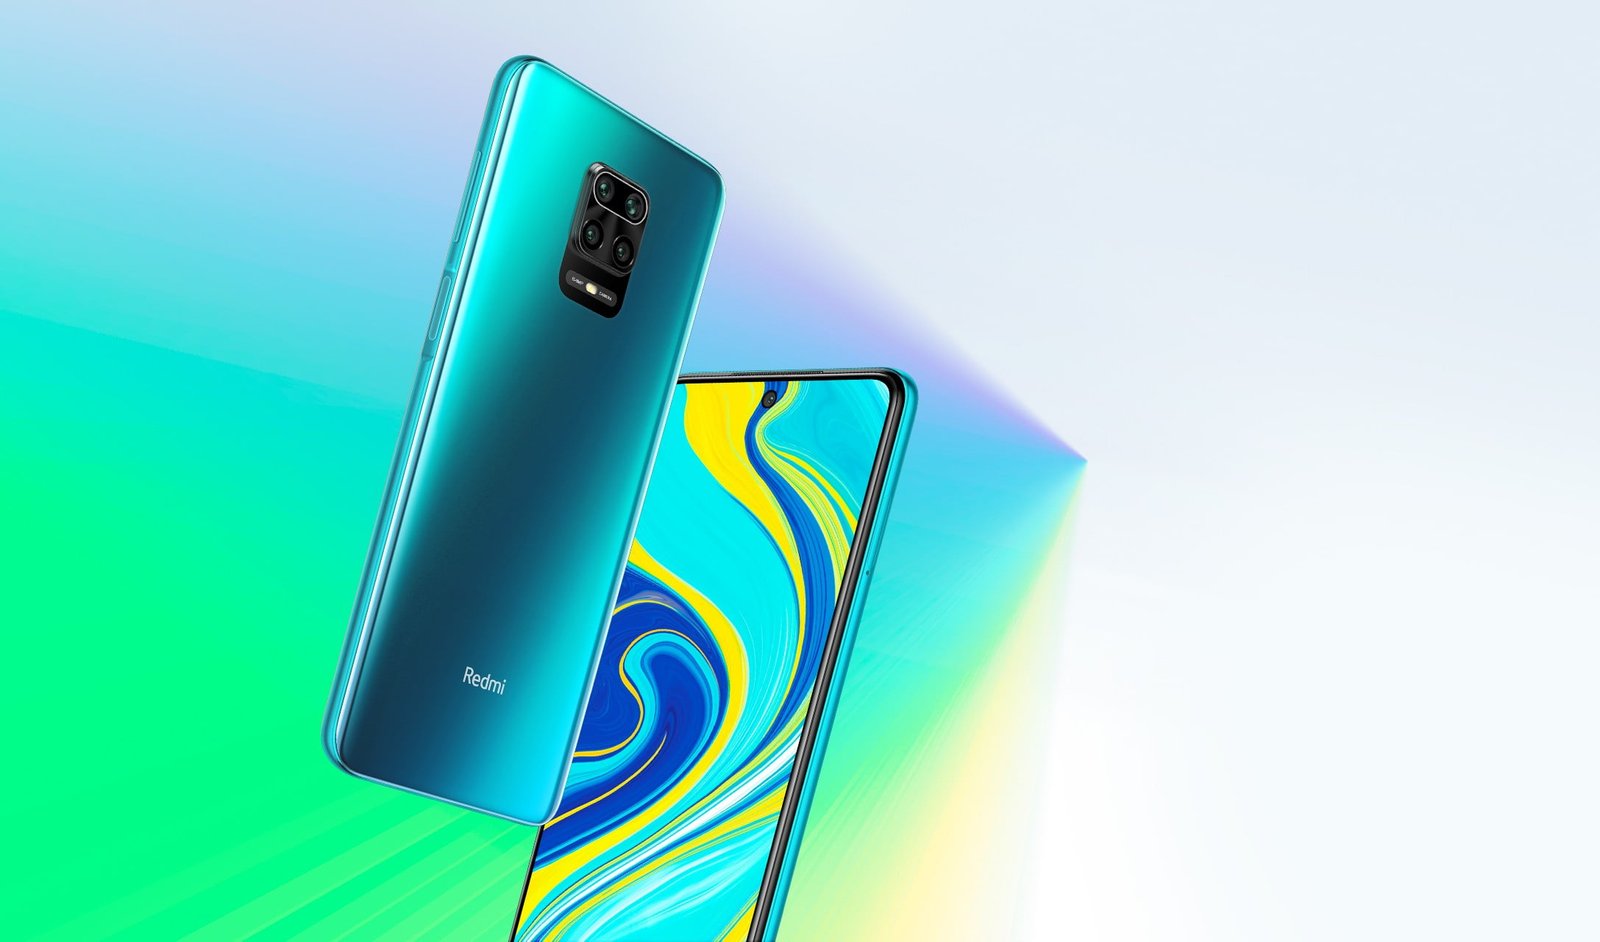 Now In Stores: Buy Redmi Note 9s In Nigeria